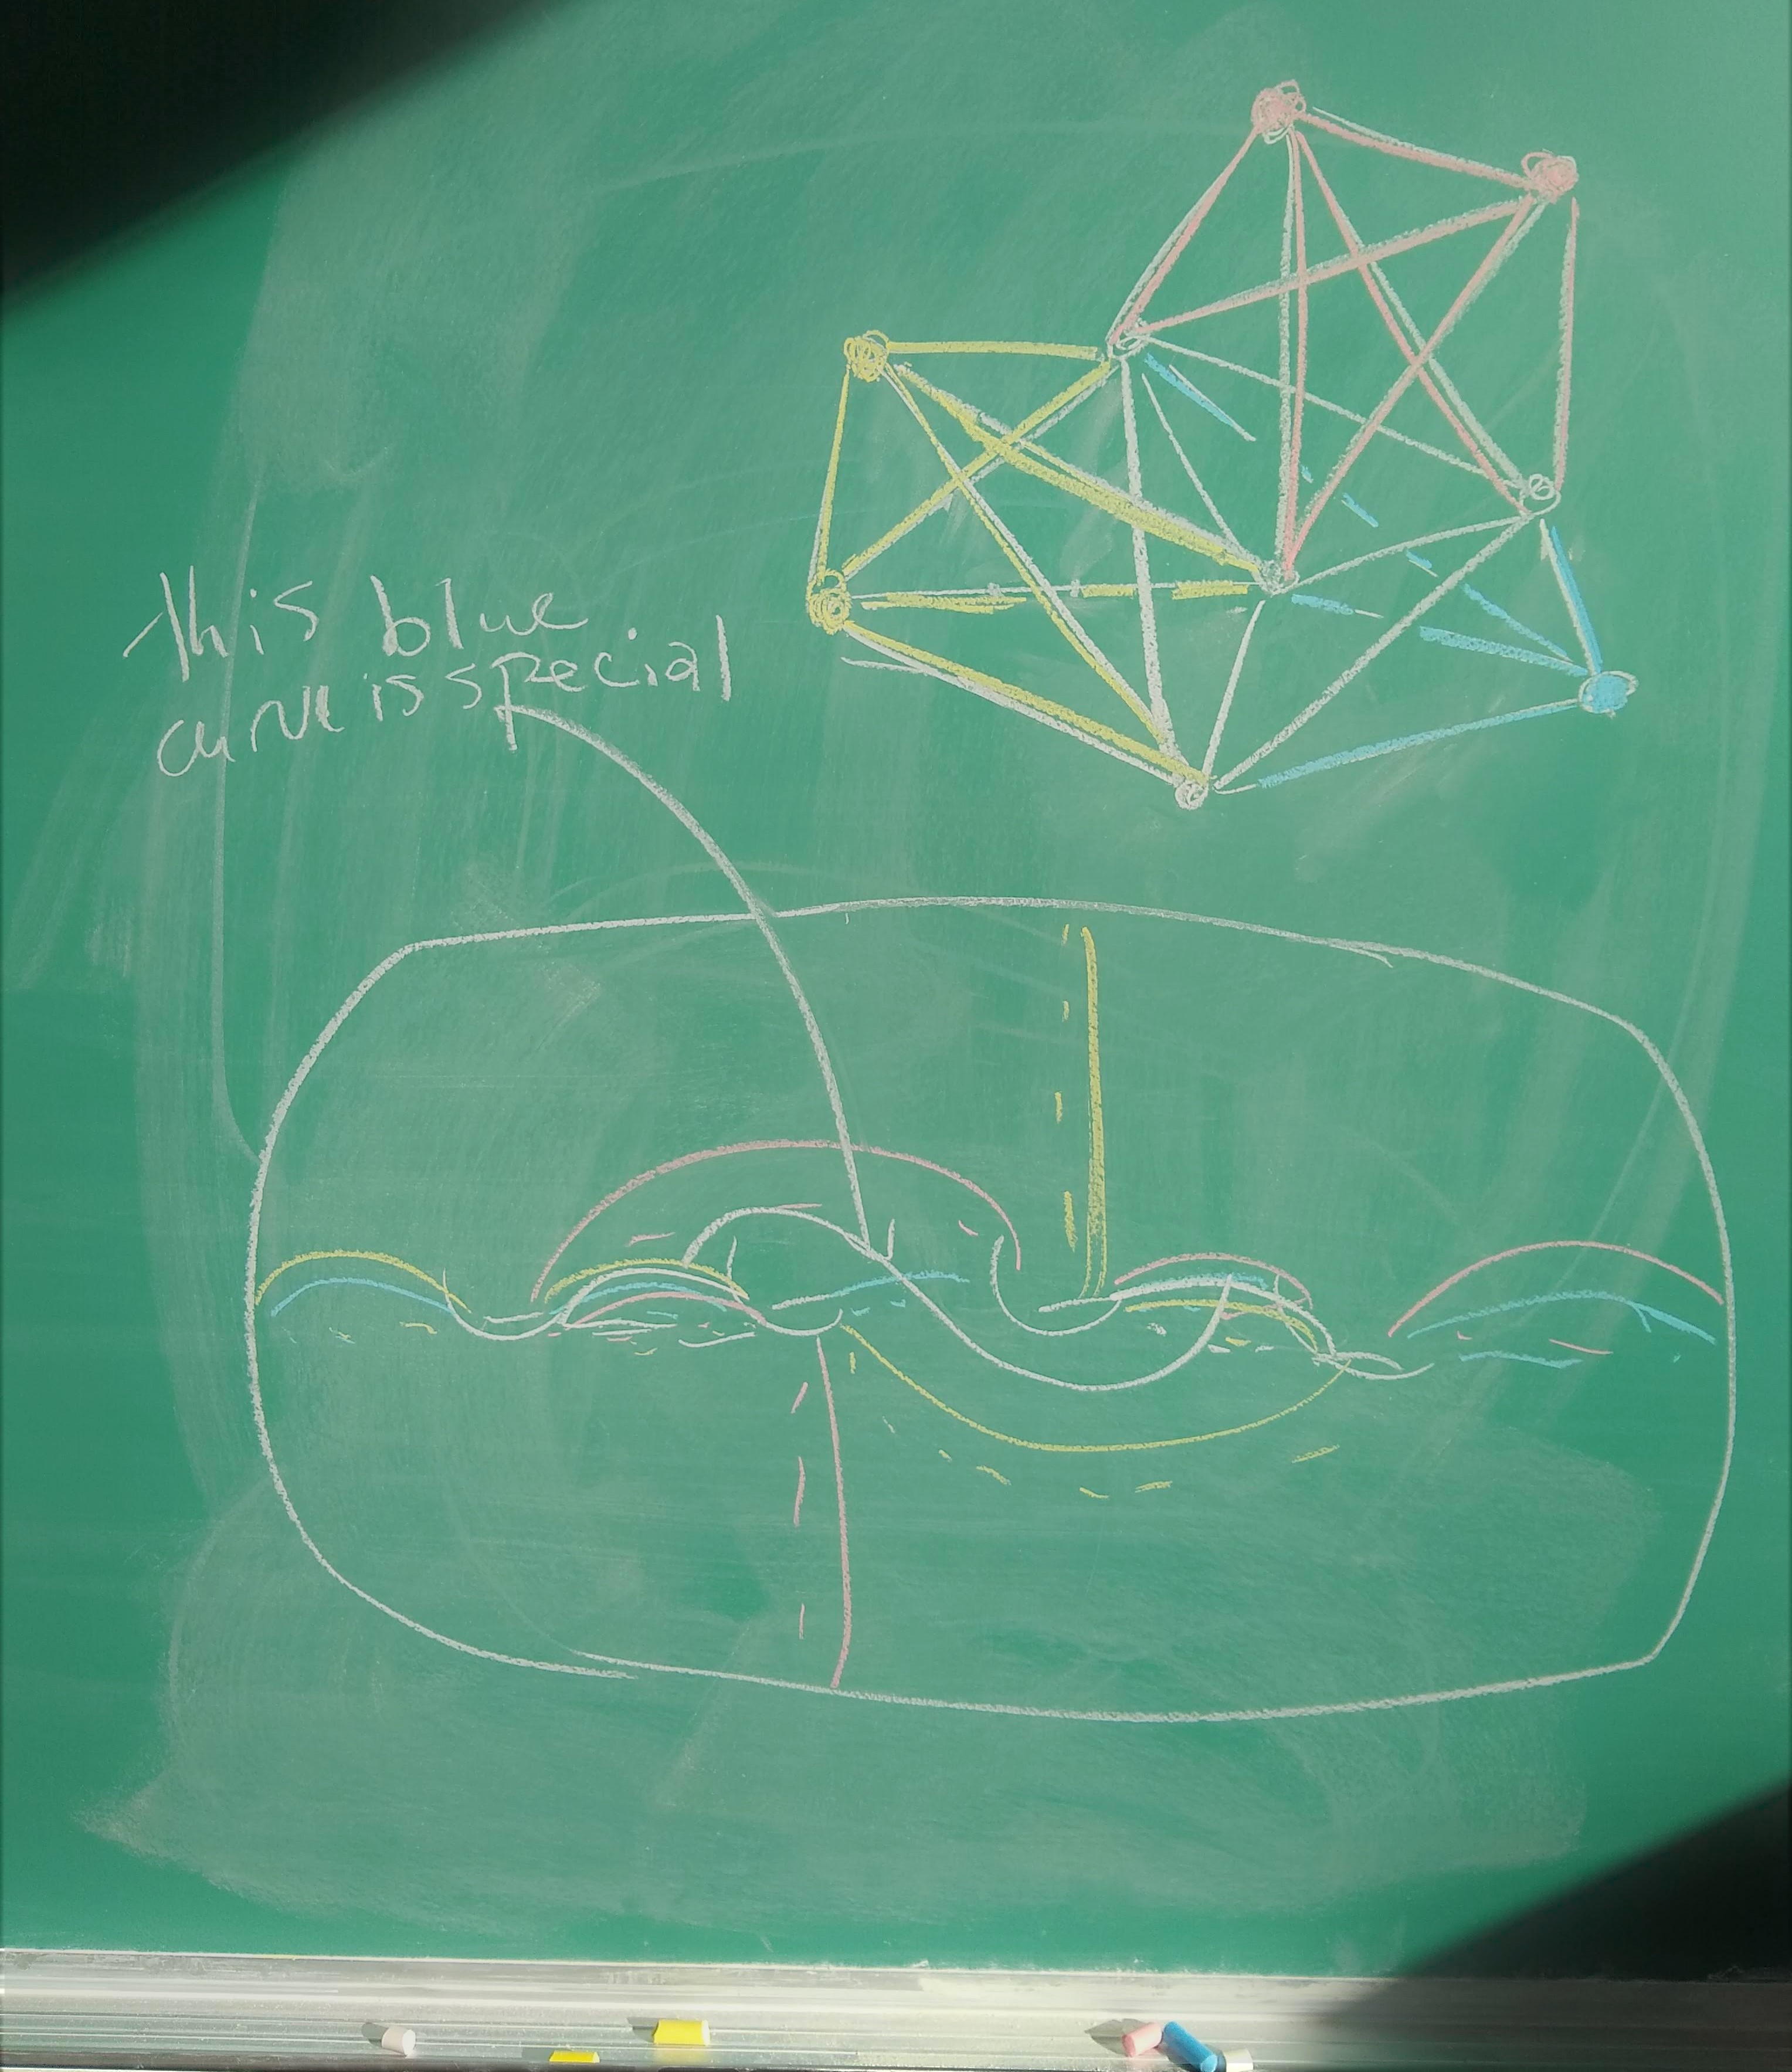 A chalkboard with a drawing of simple curves on a genus 4 surface